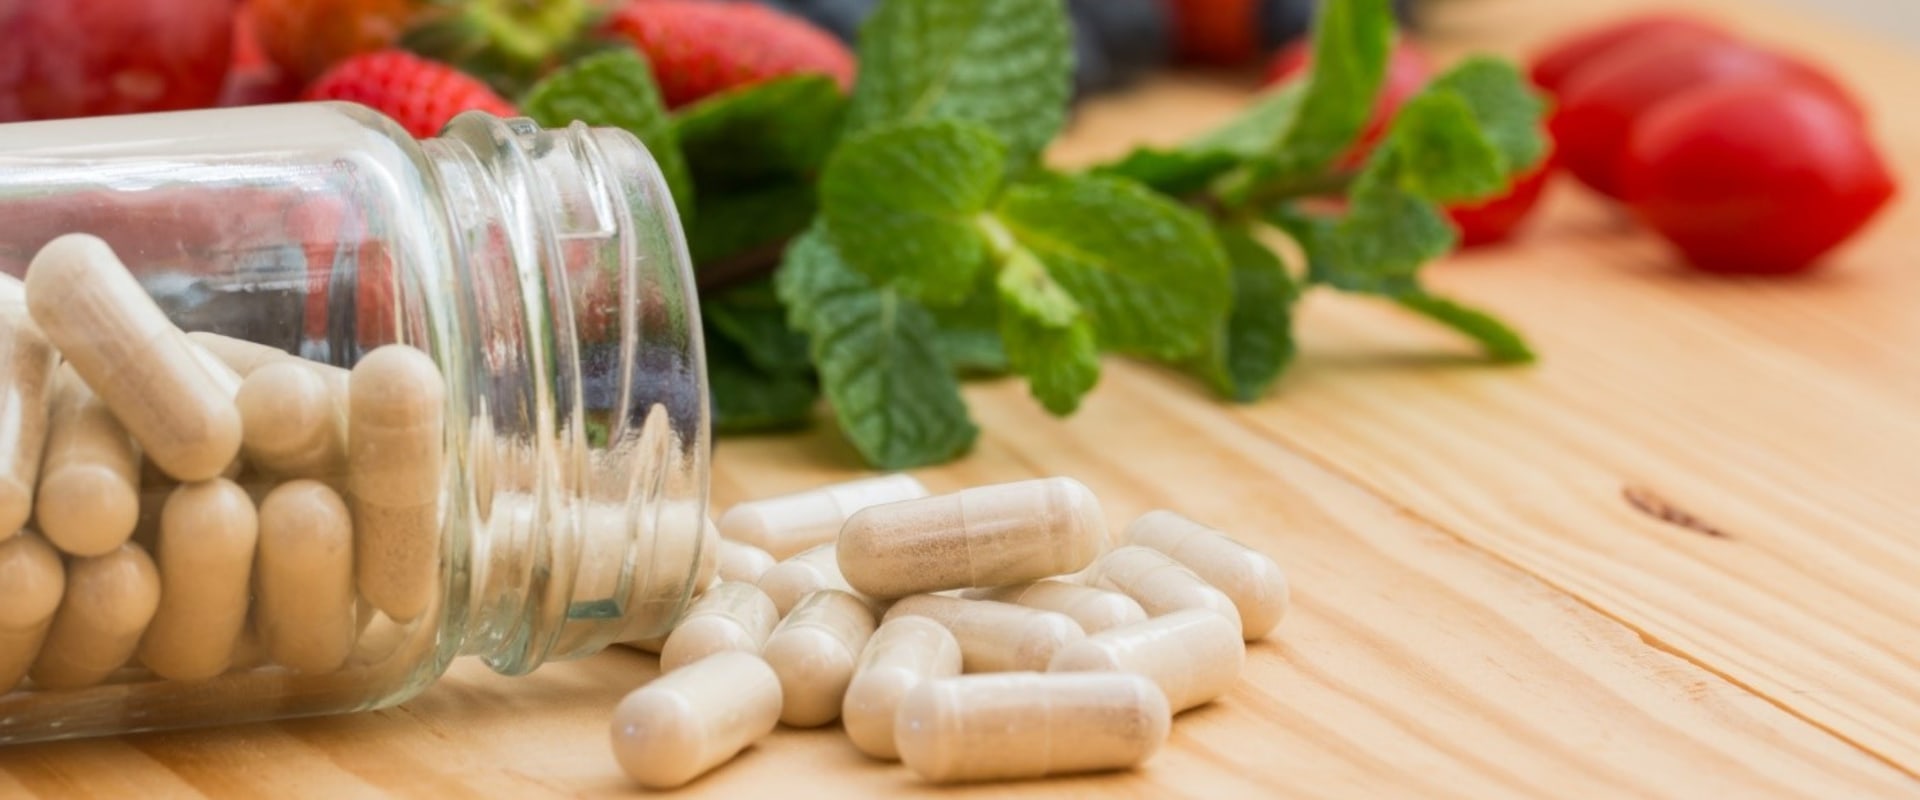 Are Dietary Supplements Interacting with Food? A Comprehensive Guide